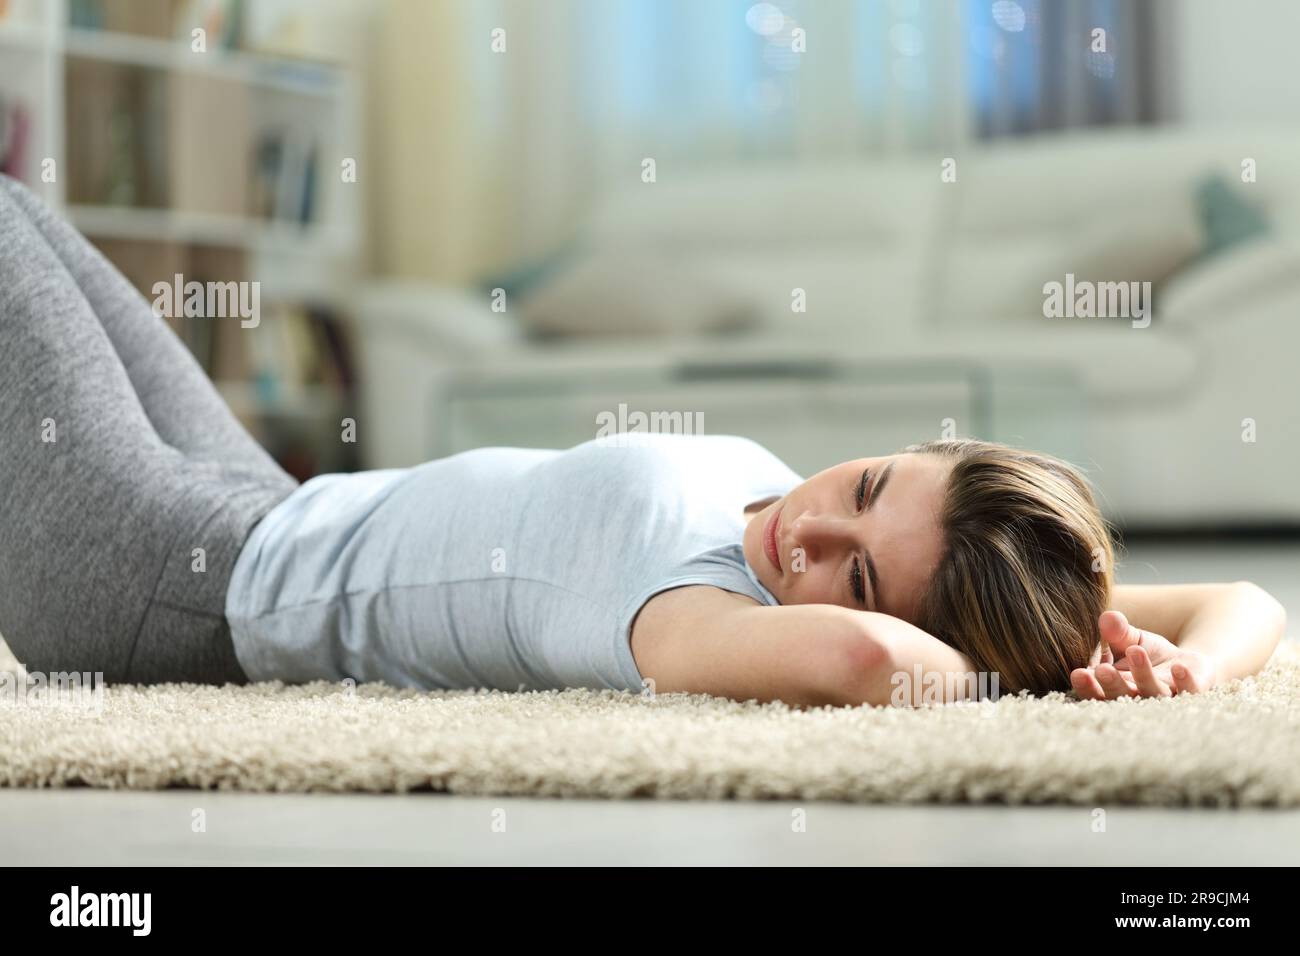 Sad woman lying on a carpet discouraged at home in the night Stock Photo